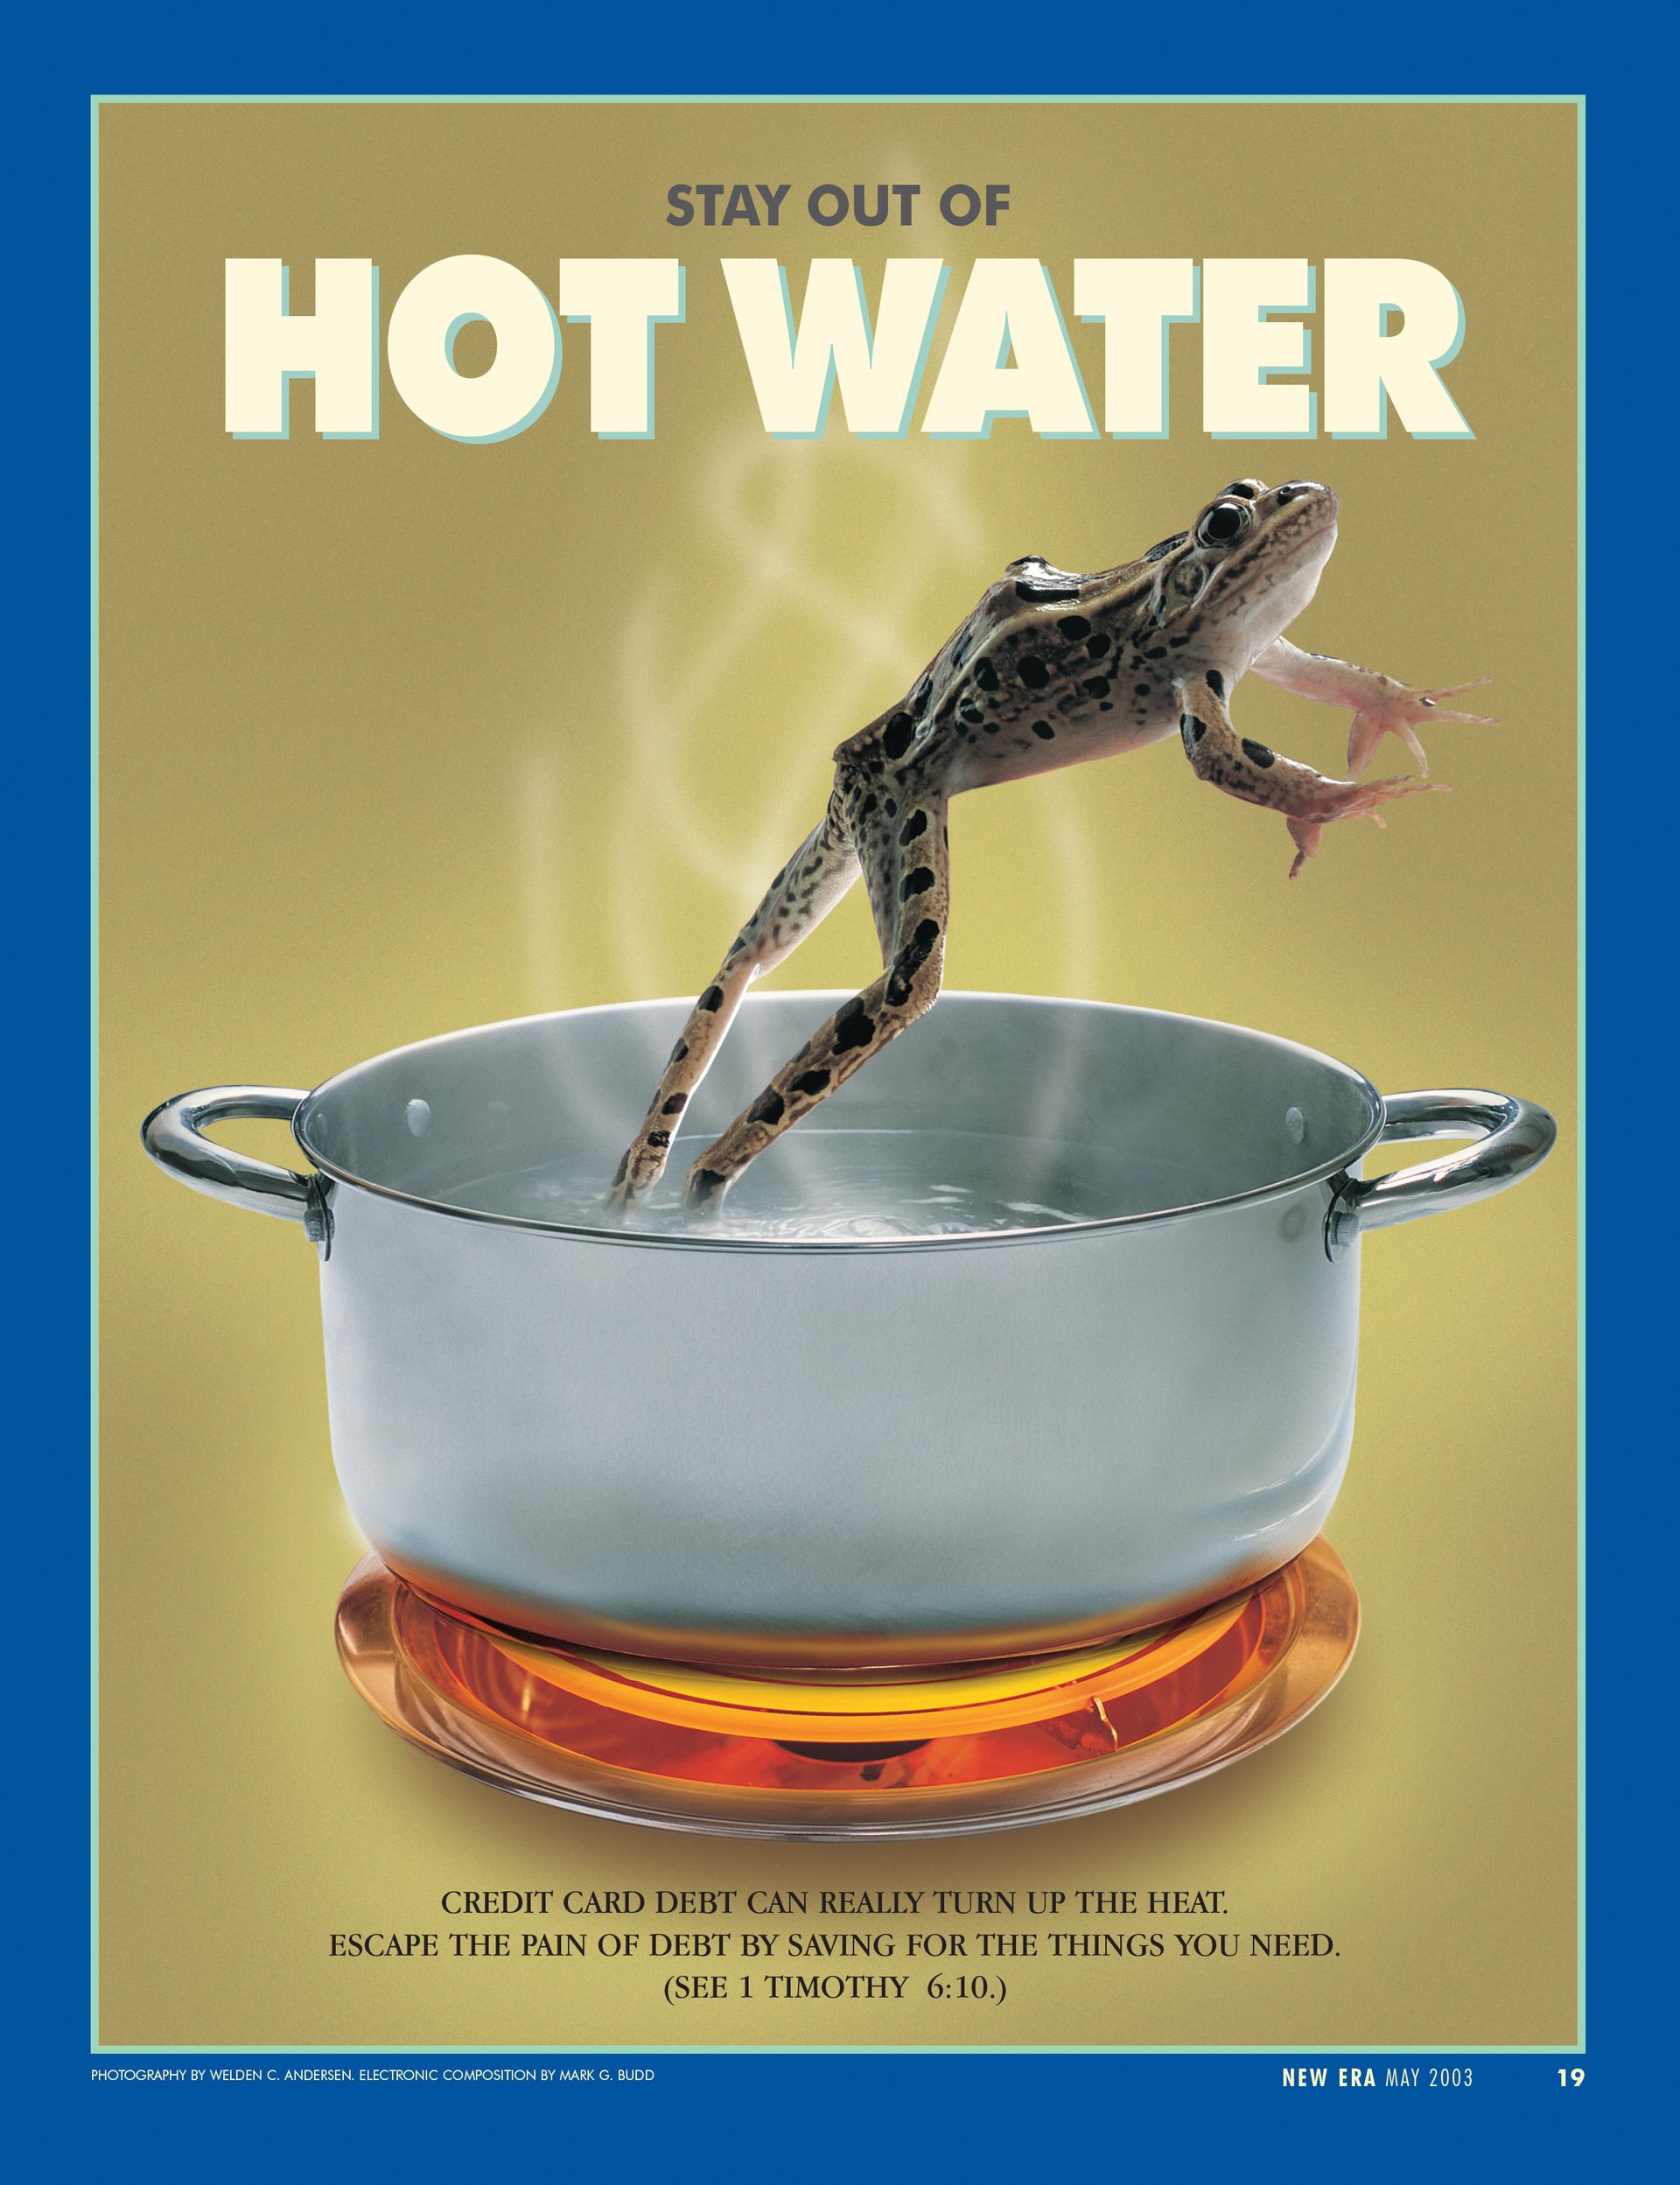 Stay out of Hot Water. Credit card debt can really turn up the heat. Escape the pain of debt by saving for the things you need. (See 1 Timothy 6:10.) May 2003 © undefined ipCode 1.